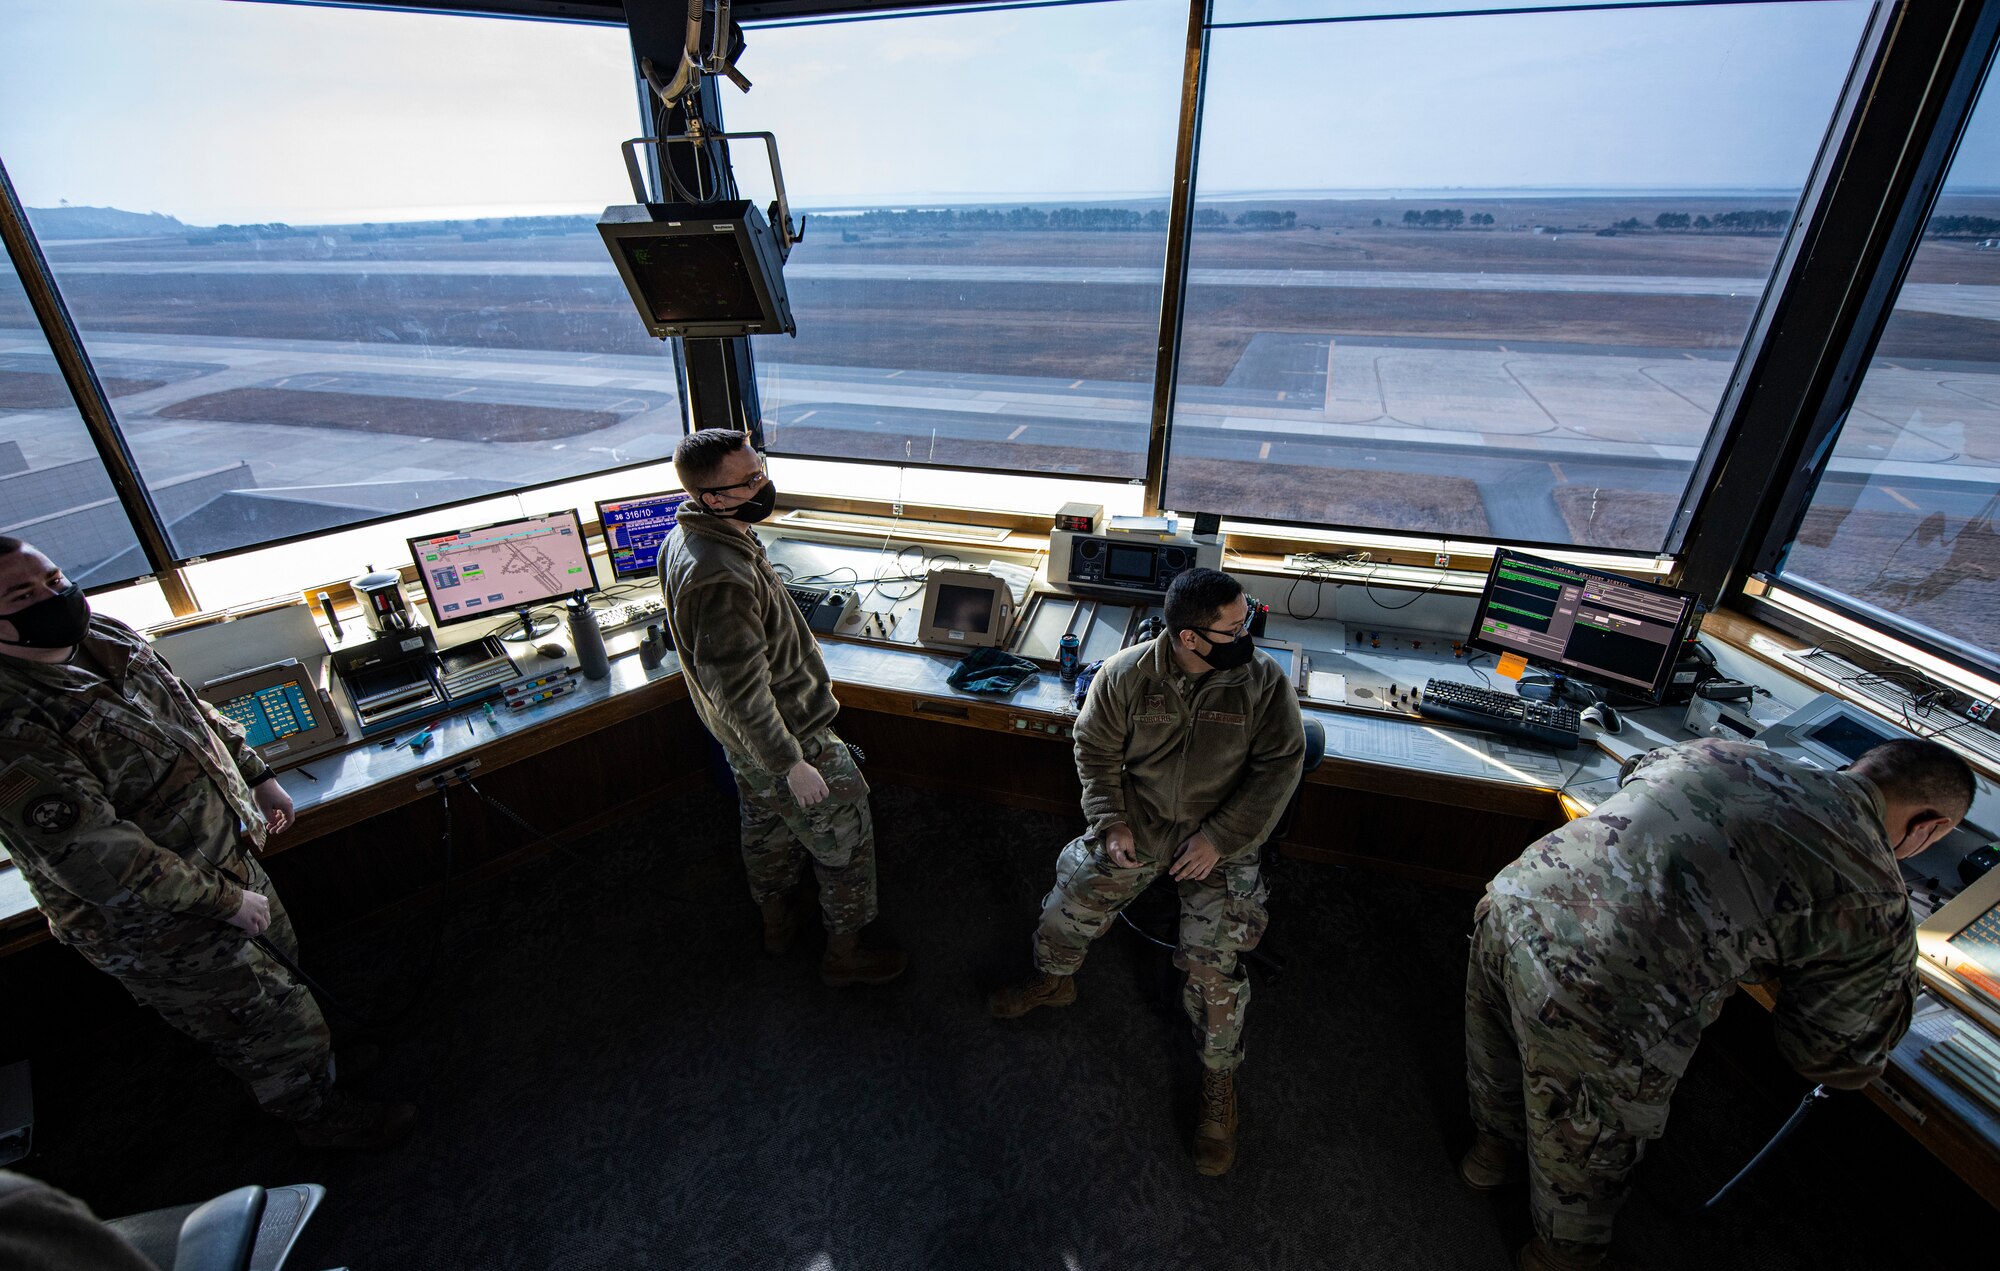 Air traffic controllers assigned to the 8th Operations Support Squadron direct aircraft at Kunsan Air Base, Republic of Korea, Jan. 10, 2021. Air traffic controllers are responsible for managing the flow of aircraft through all aspects of their flight to ensure the safety and efficiency of air traffic on the ground and in the air. (U.S. Air Force photo by Staff Sgt. Suzie Plotnikov)